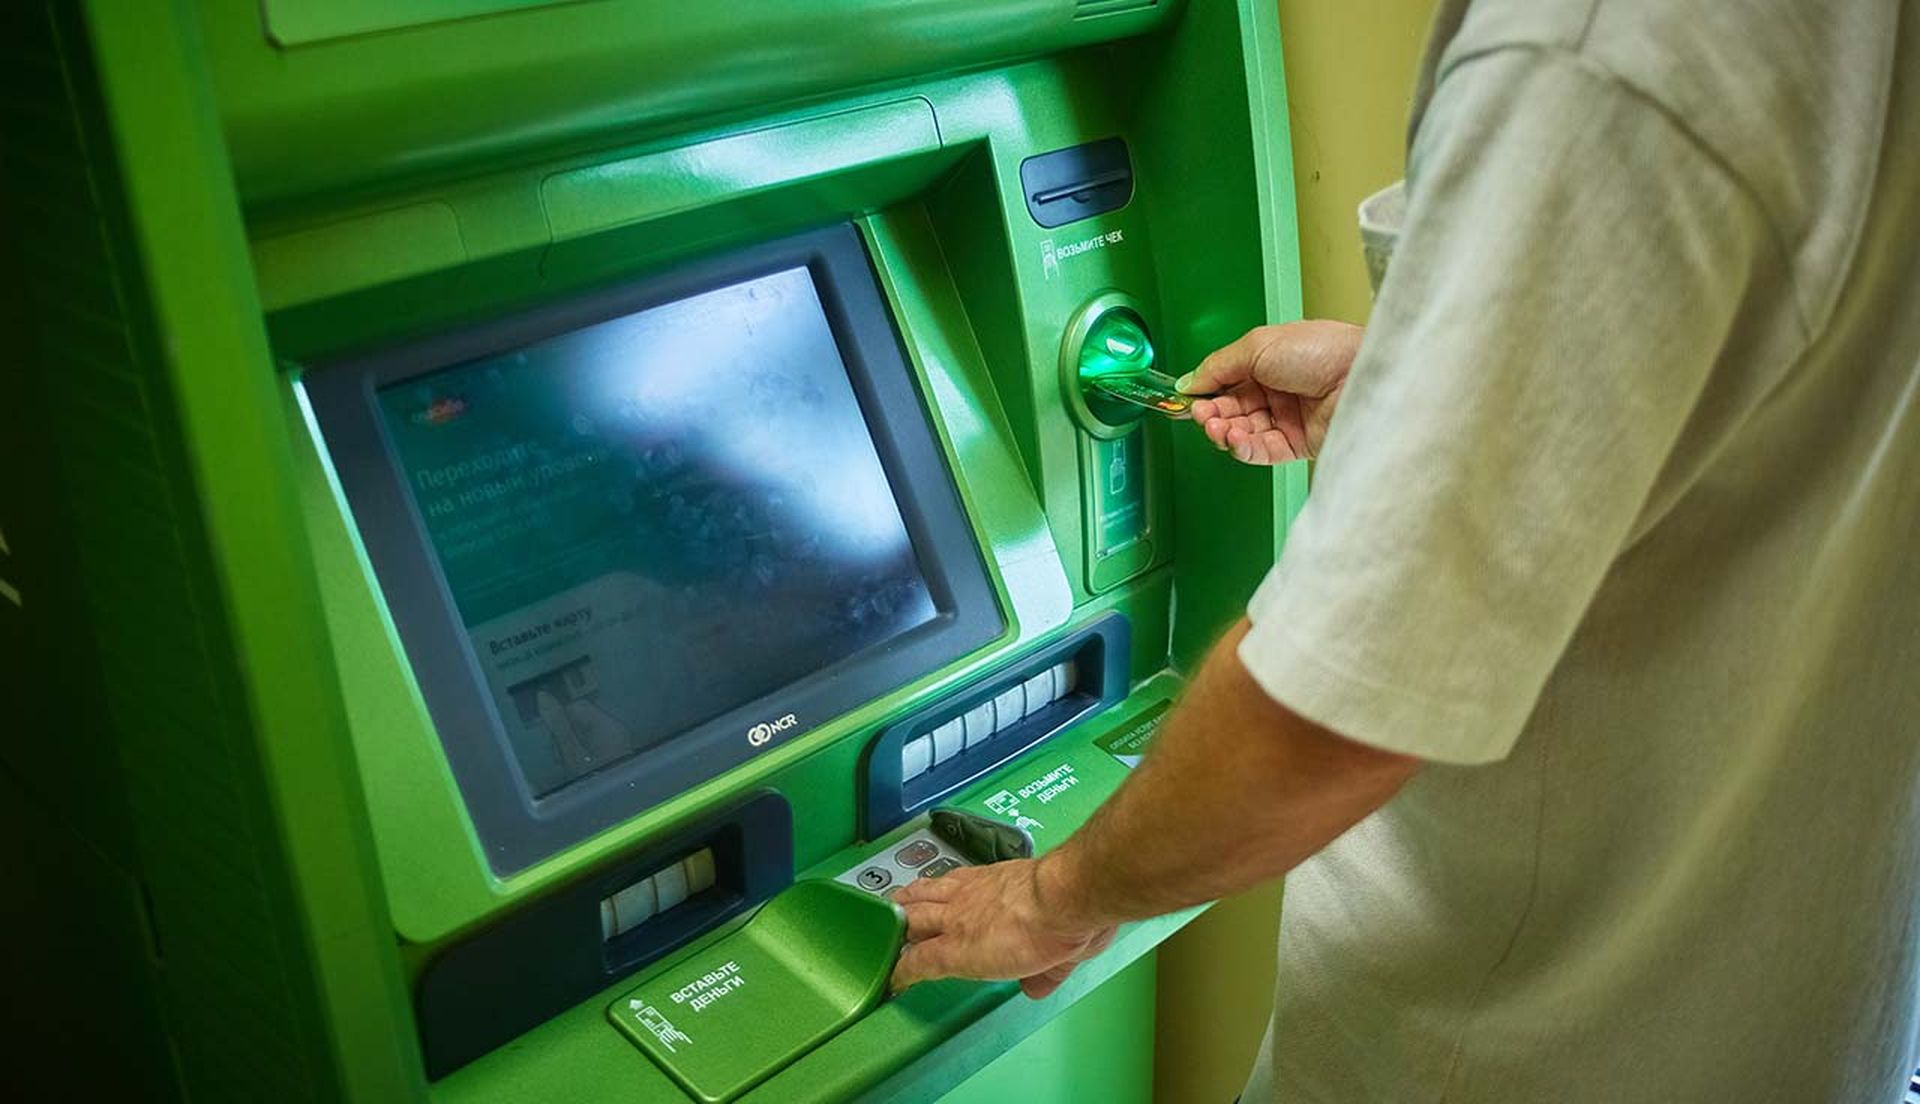 A man uses a green-colored ATM